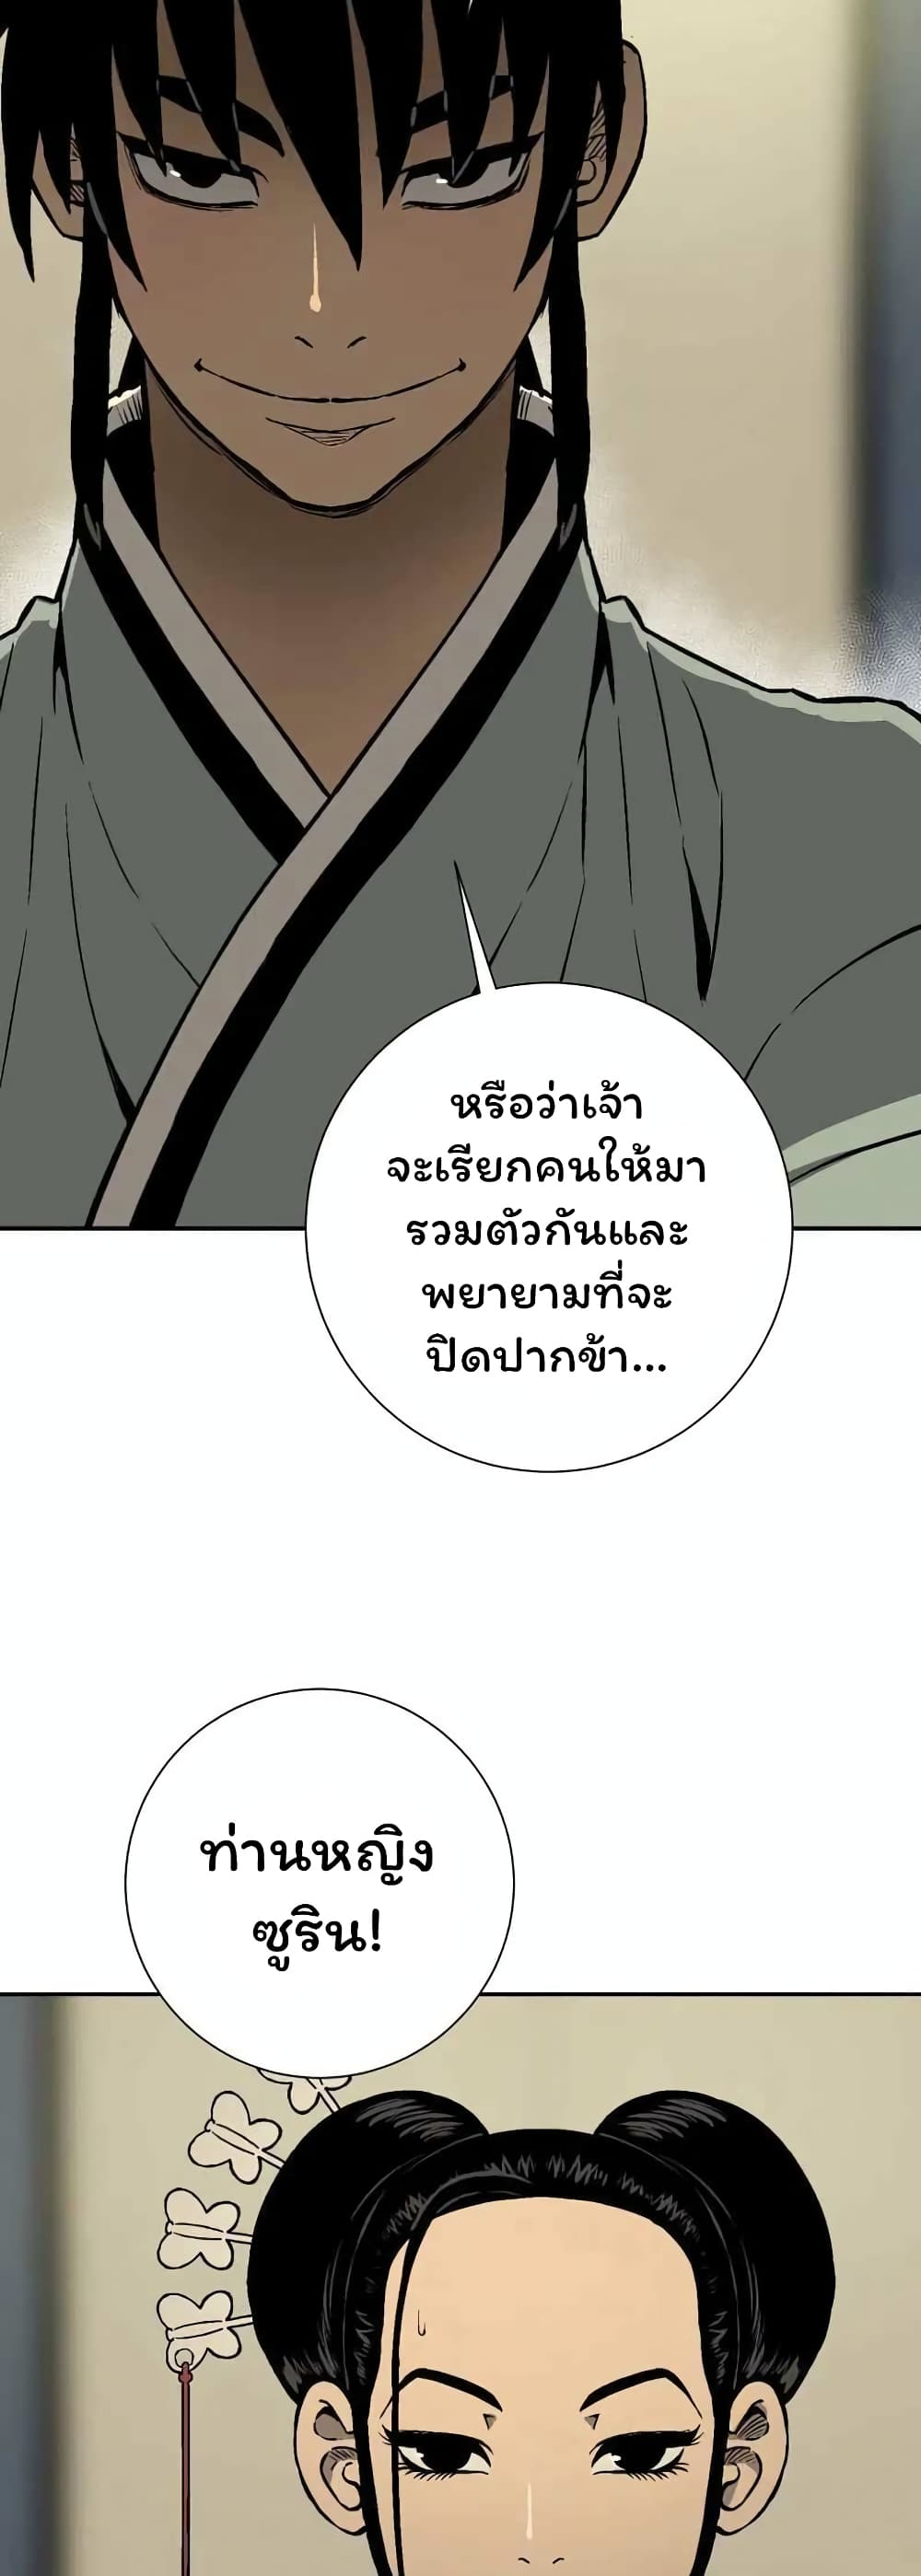 Tales of A Shinning Sword ตอนที่ 36 (18)